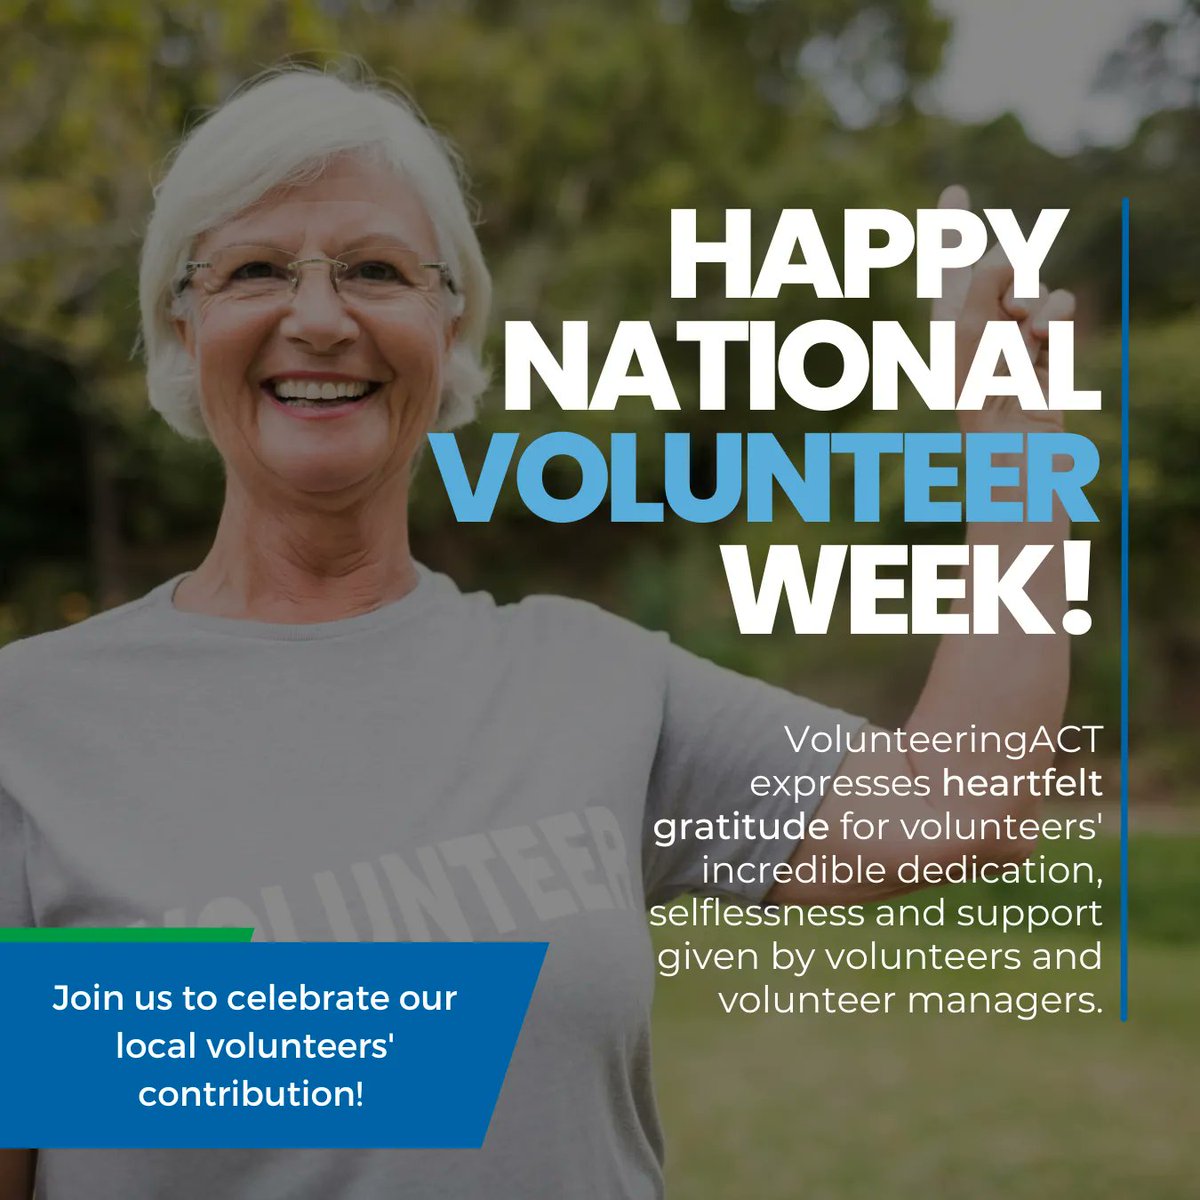 Happy National Volunteer Week! Join us to recognise and celebrate our local volunteers' contribution. Find more information about how to get involved here: buff.ly/3VoPd3Q